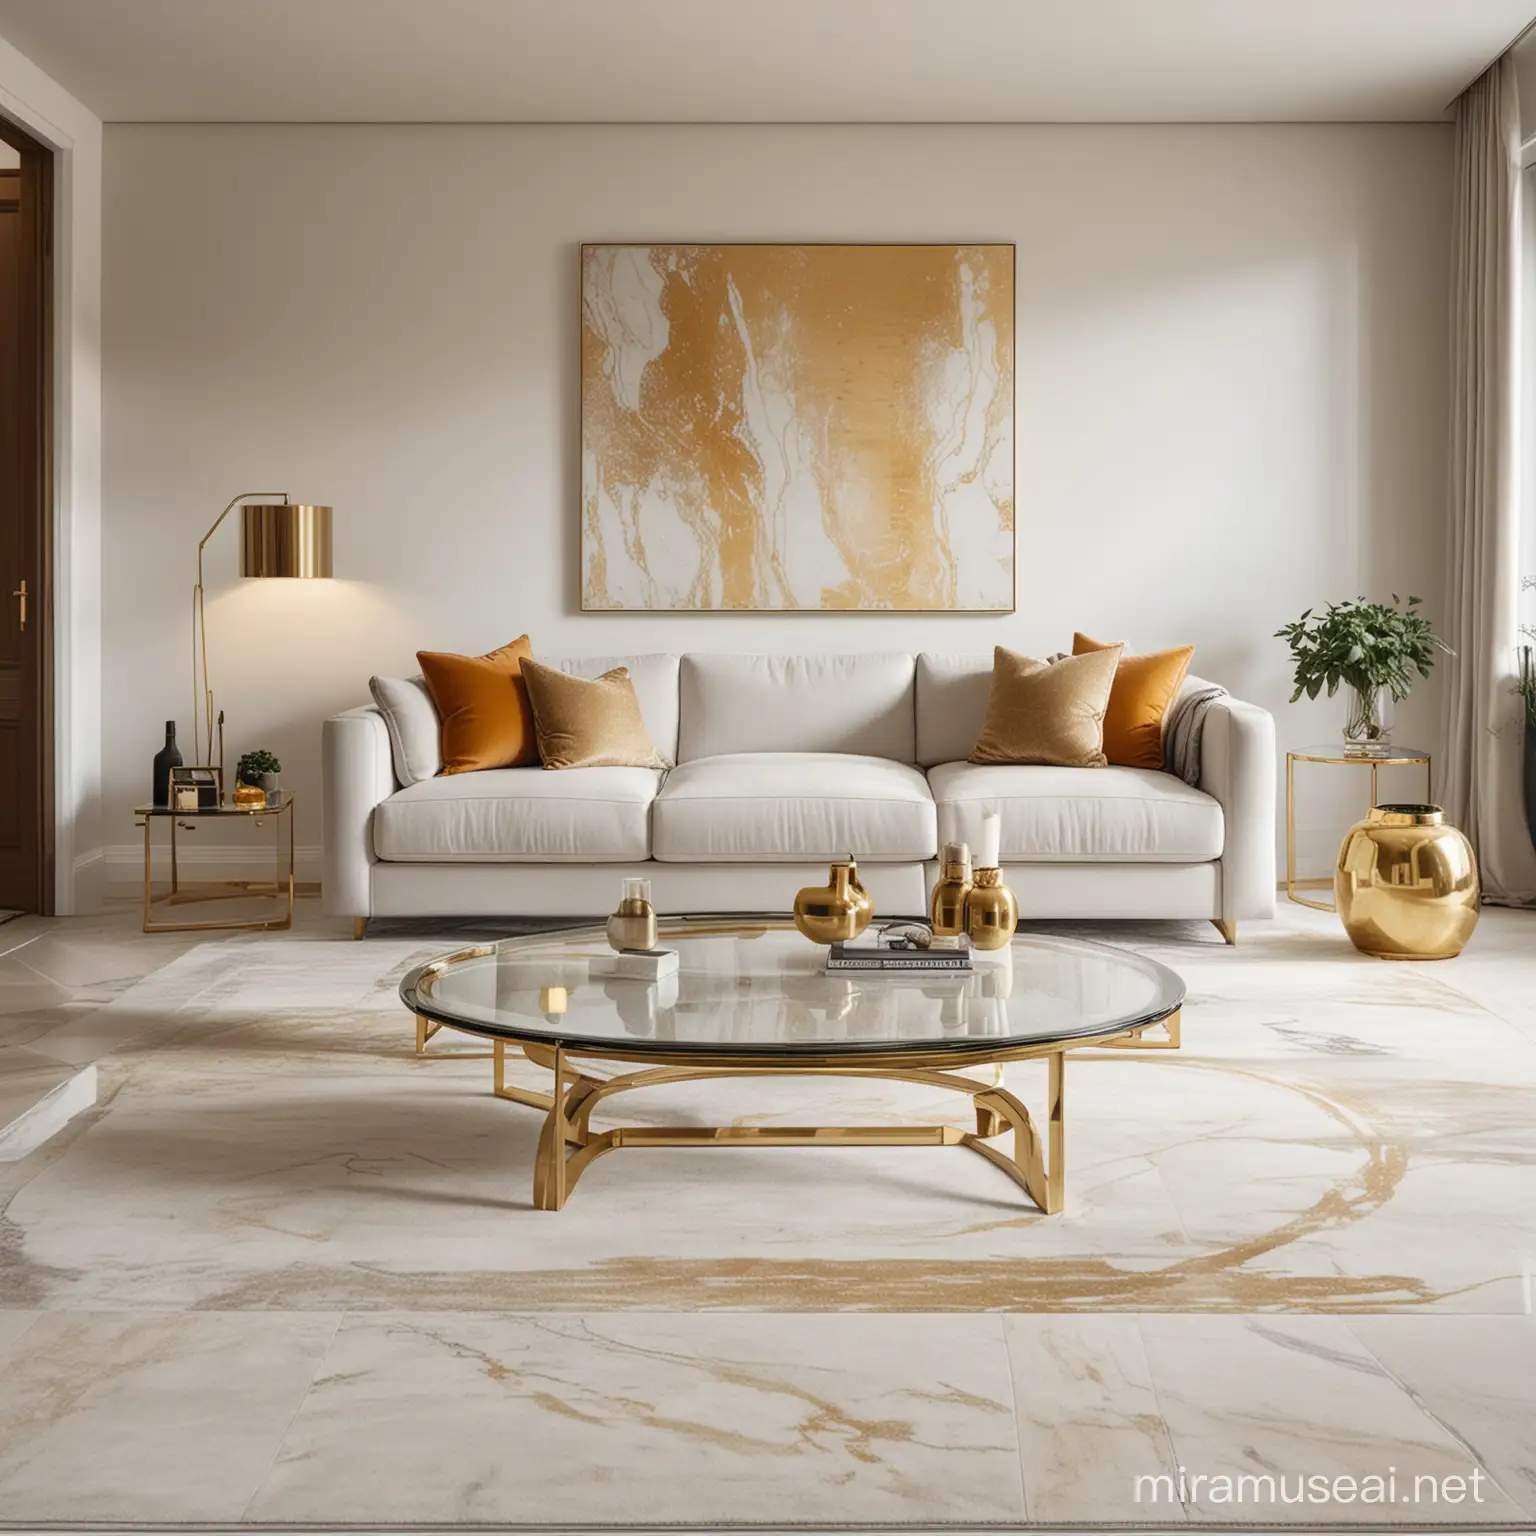 Modern White and Gold Living Room with Marble Accents and Warm Lighting